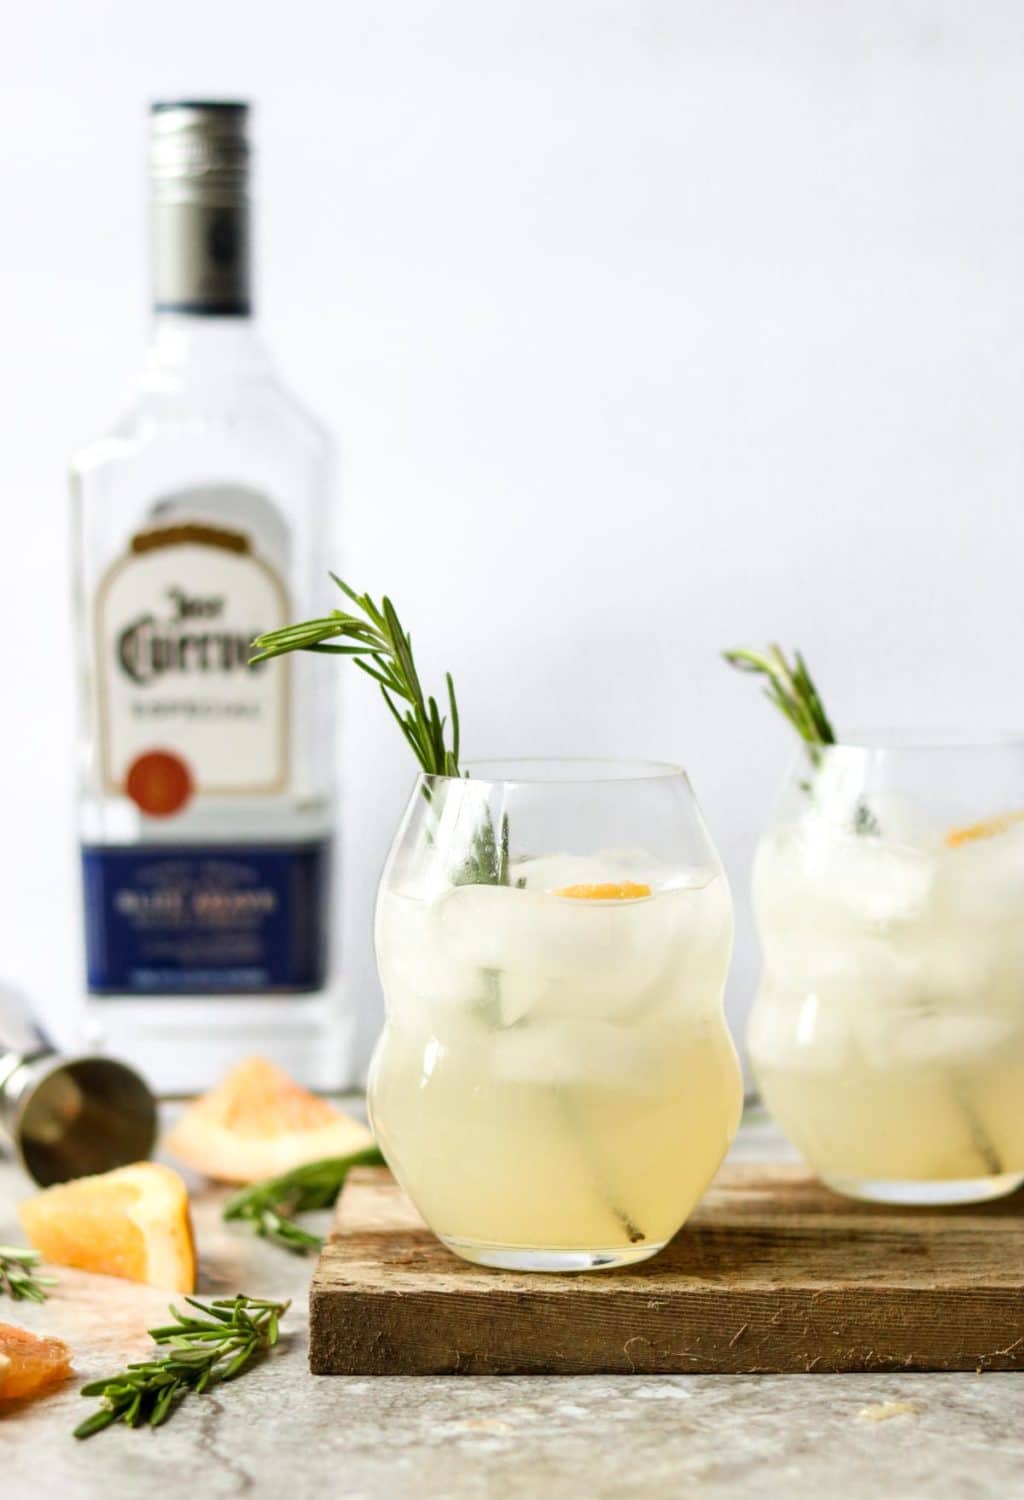 two glasses of Rosemary Paloma with rosemary sprig garnish, a bottle of tequila in the background